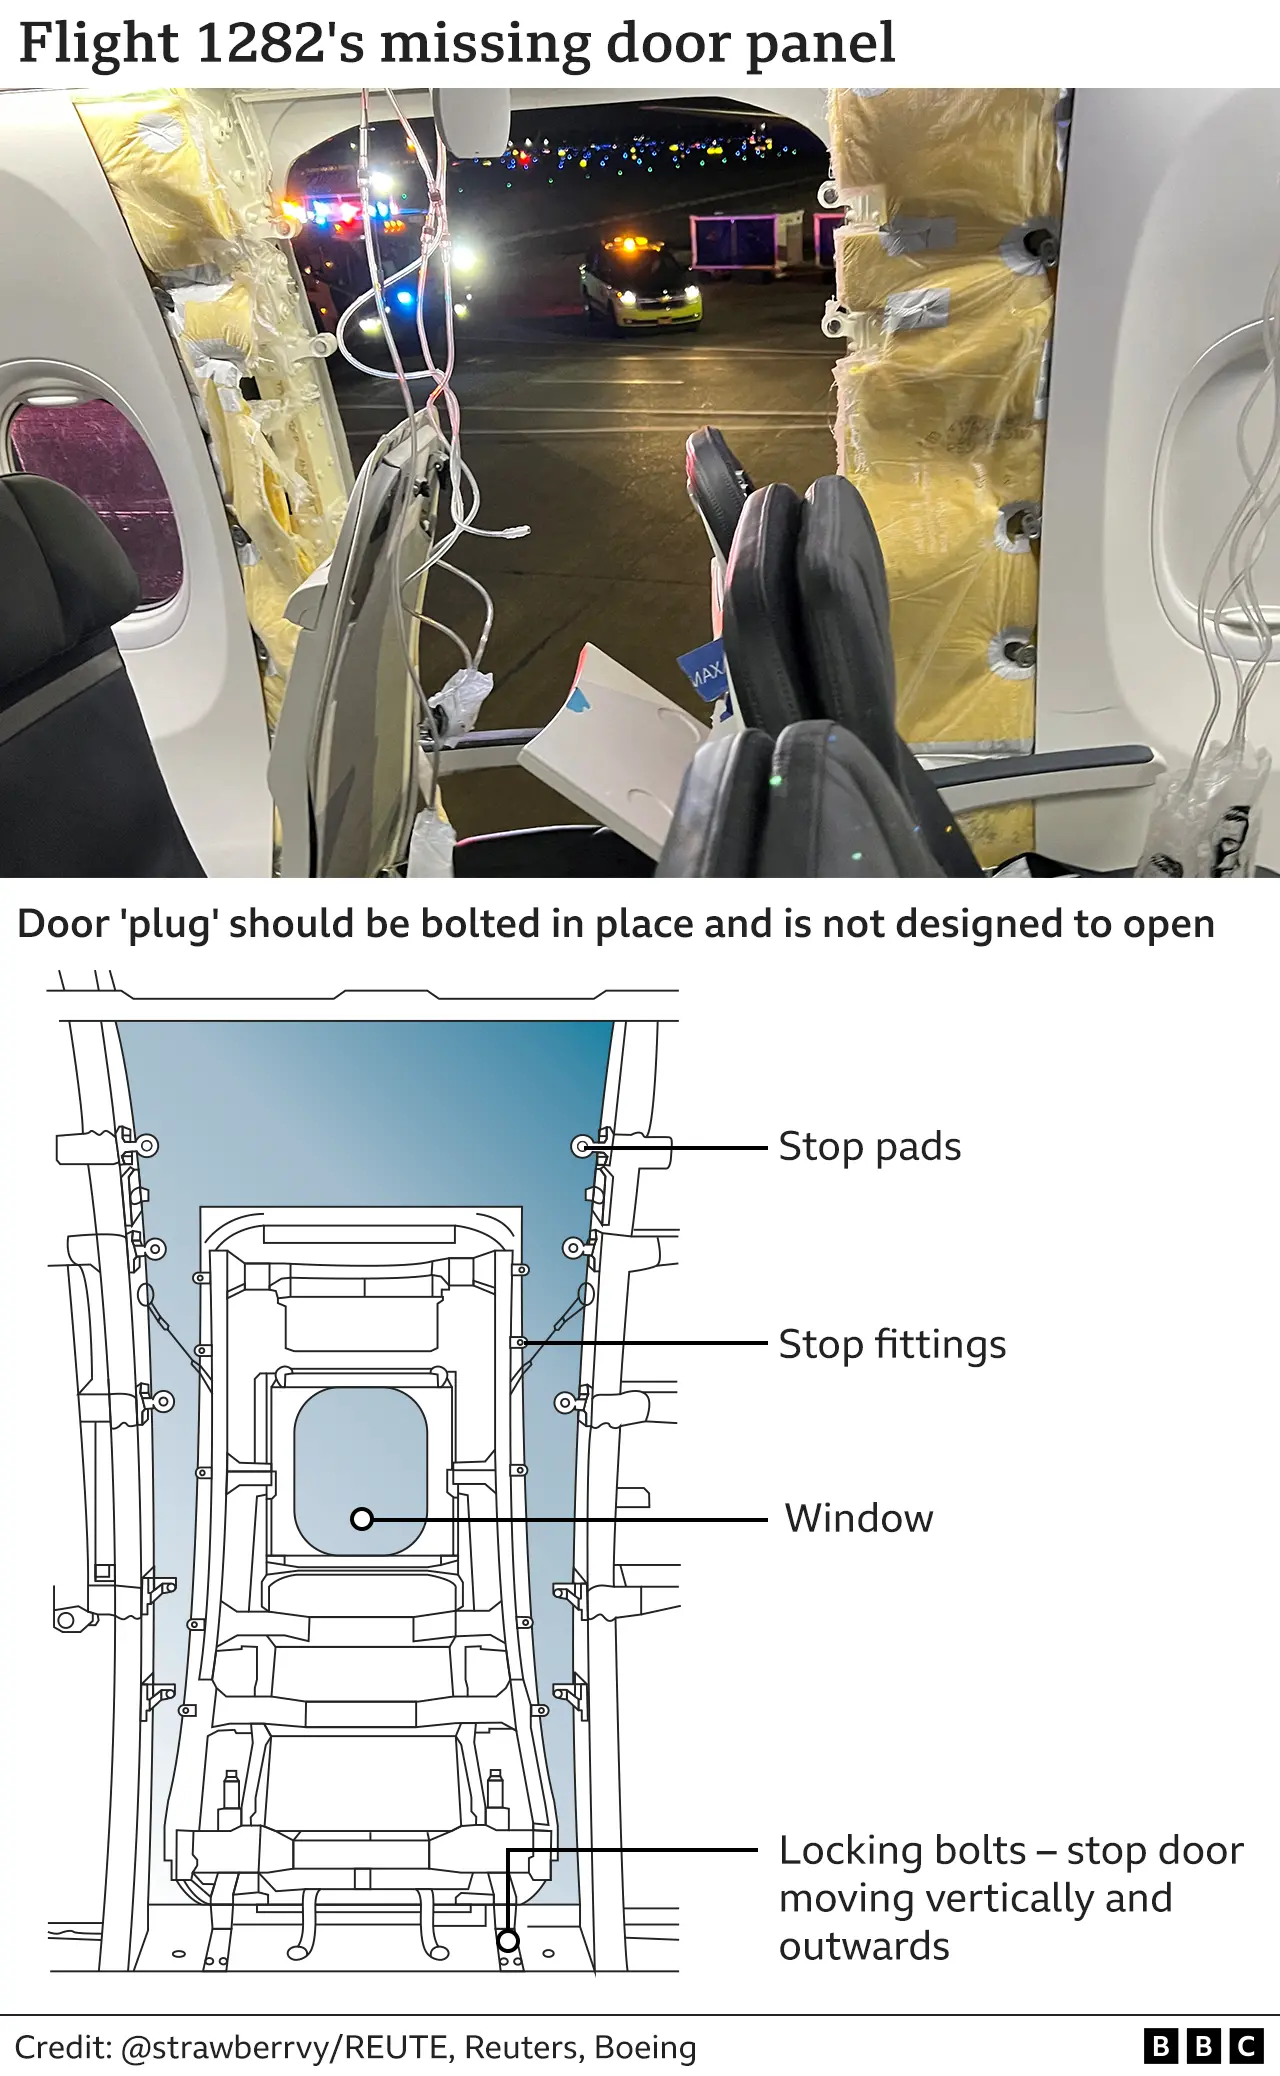 Diagram showing a picture of the plane's missing door frame accompanied with a diagram of the door layout